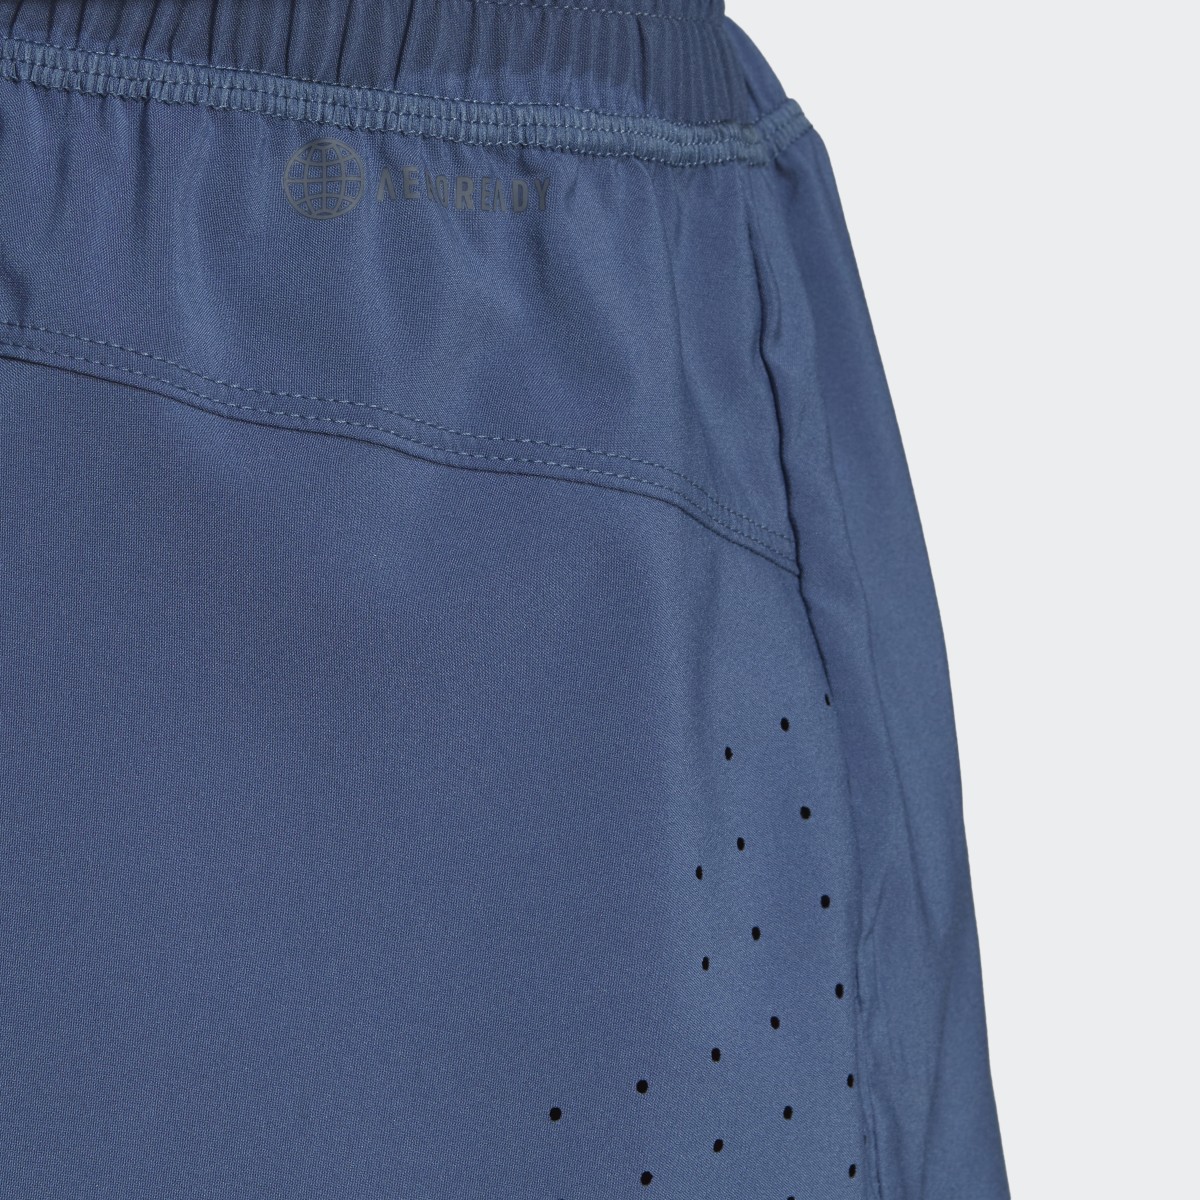 Adidas Perforated Pacer Shorts. 6